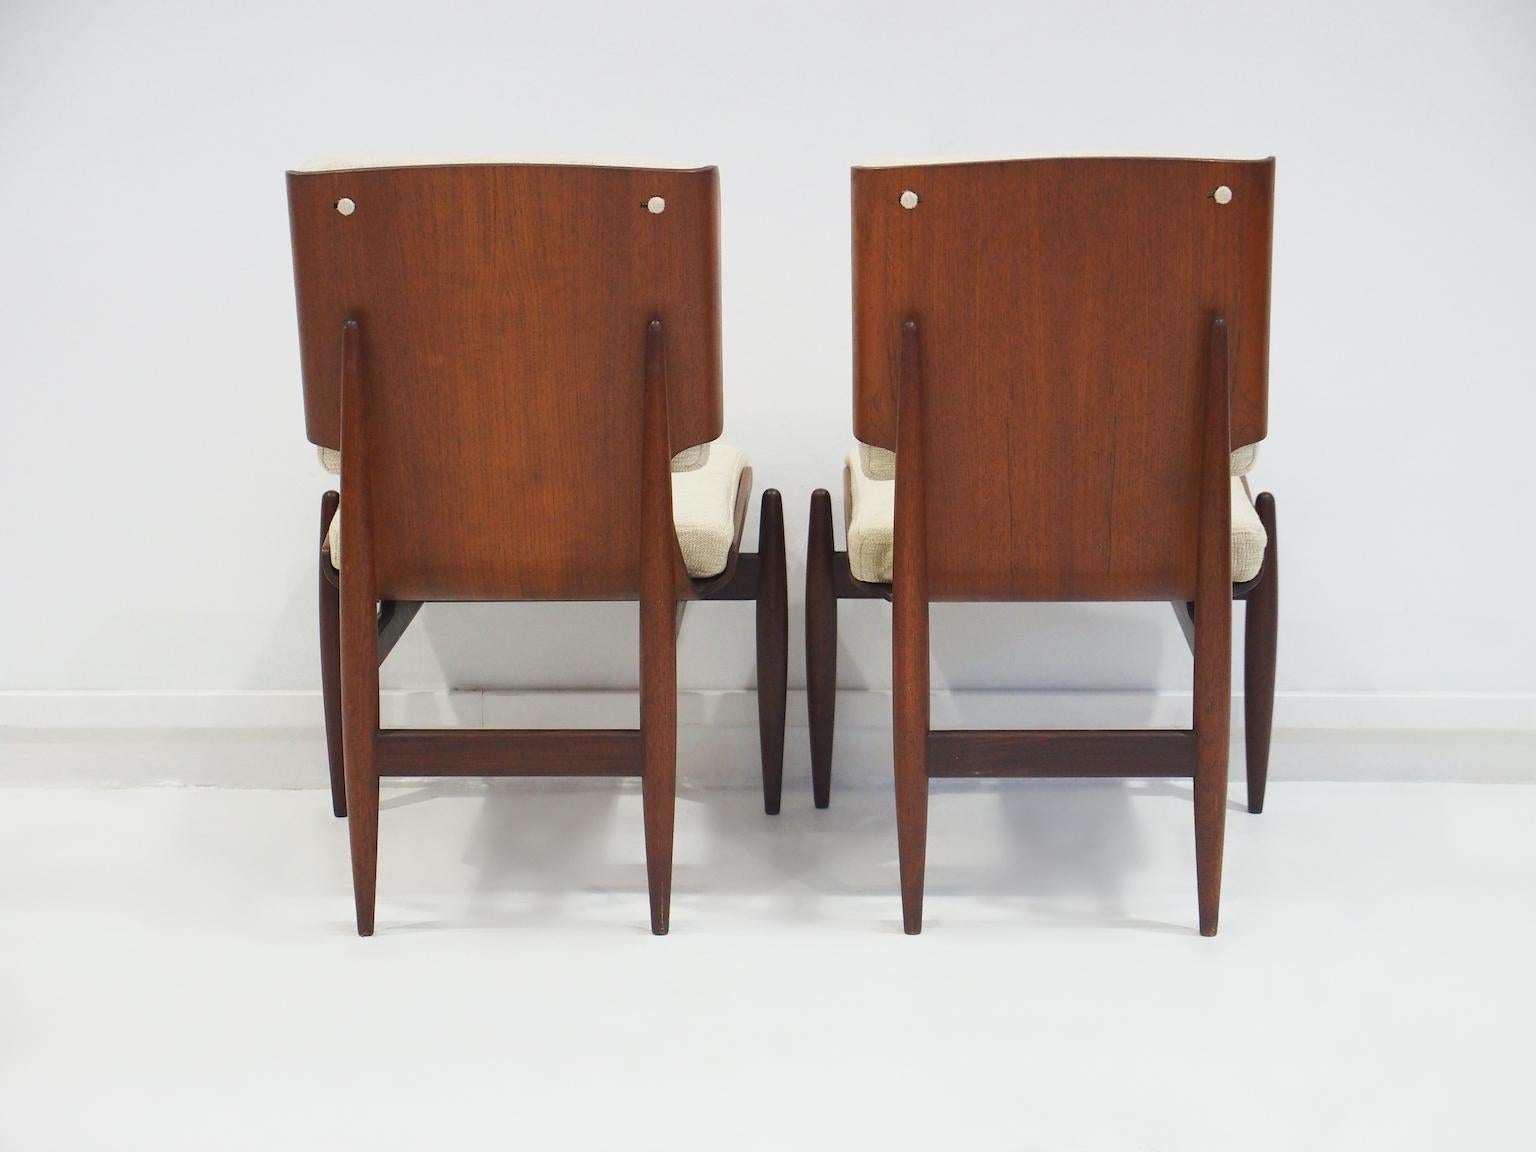 Pair of Italian Modernist Wooden Side Chairs by Barovero For Sale 5